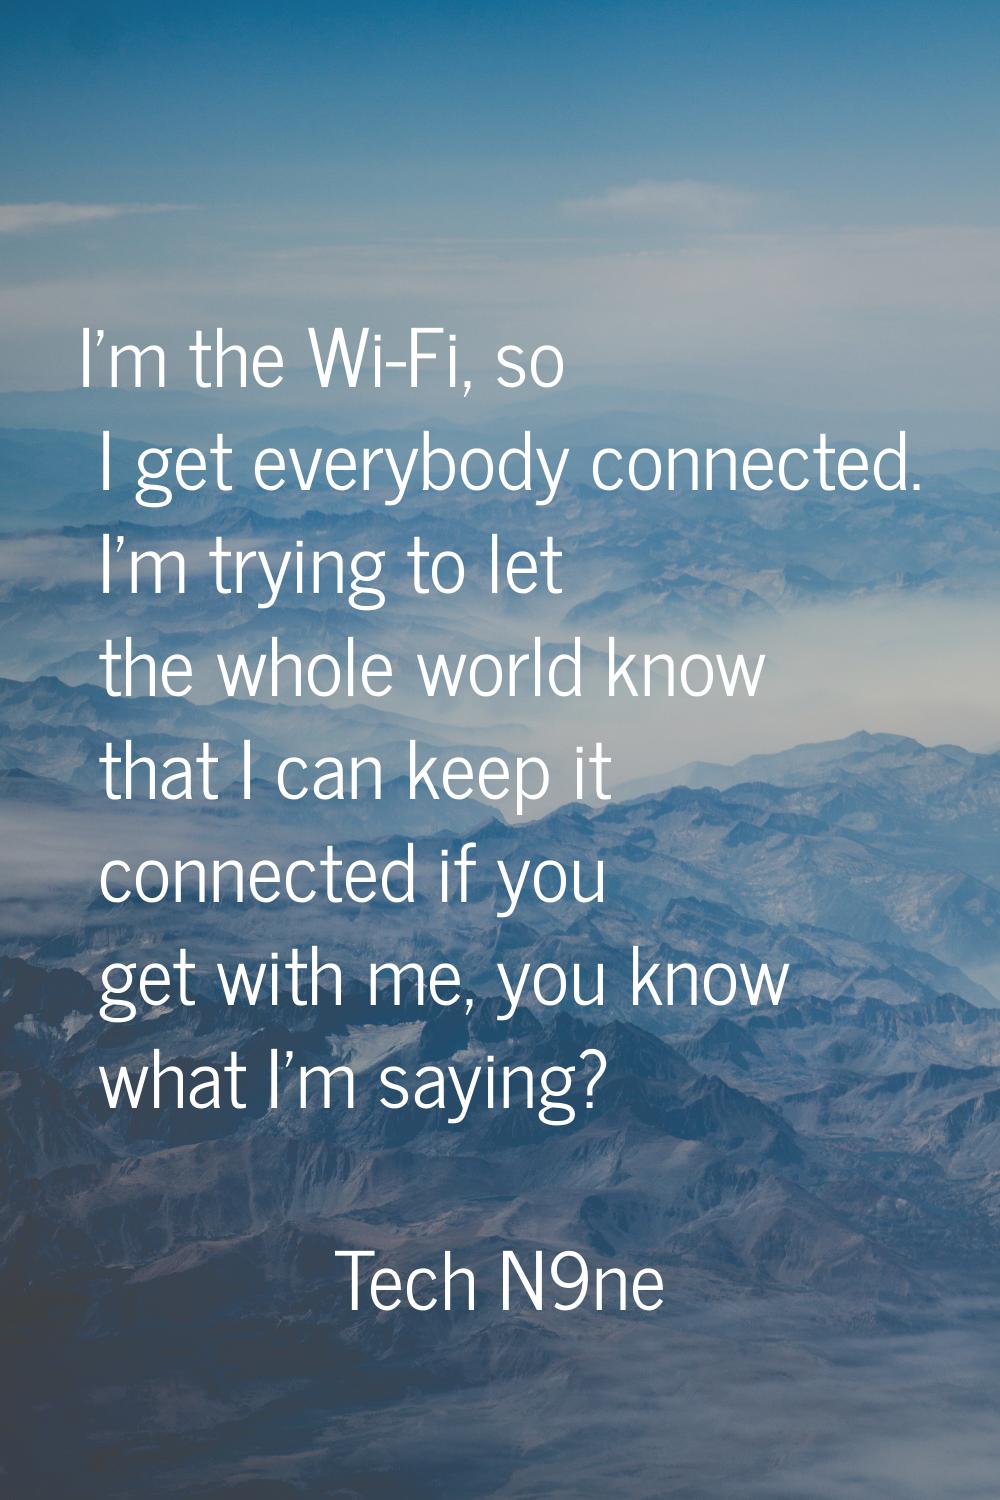 I'm the Wi-Fi, so I get everybody connected. I'm trying to let the whole world know that I can keep